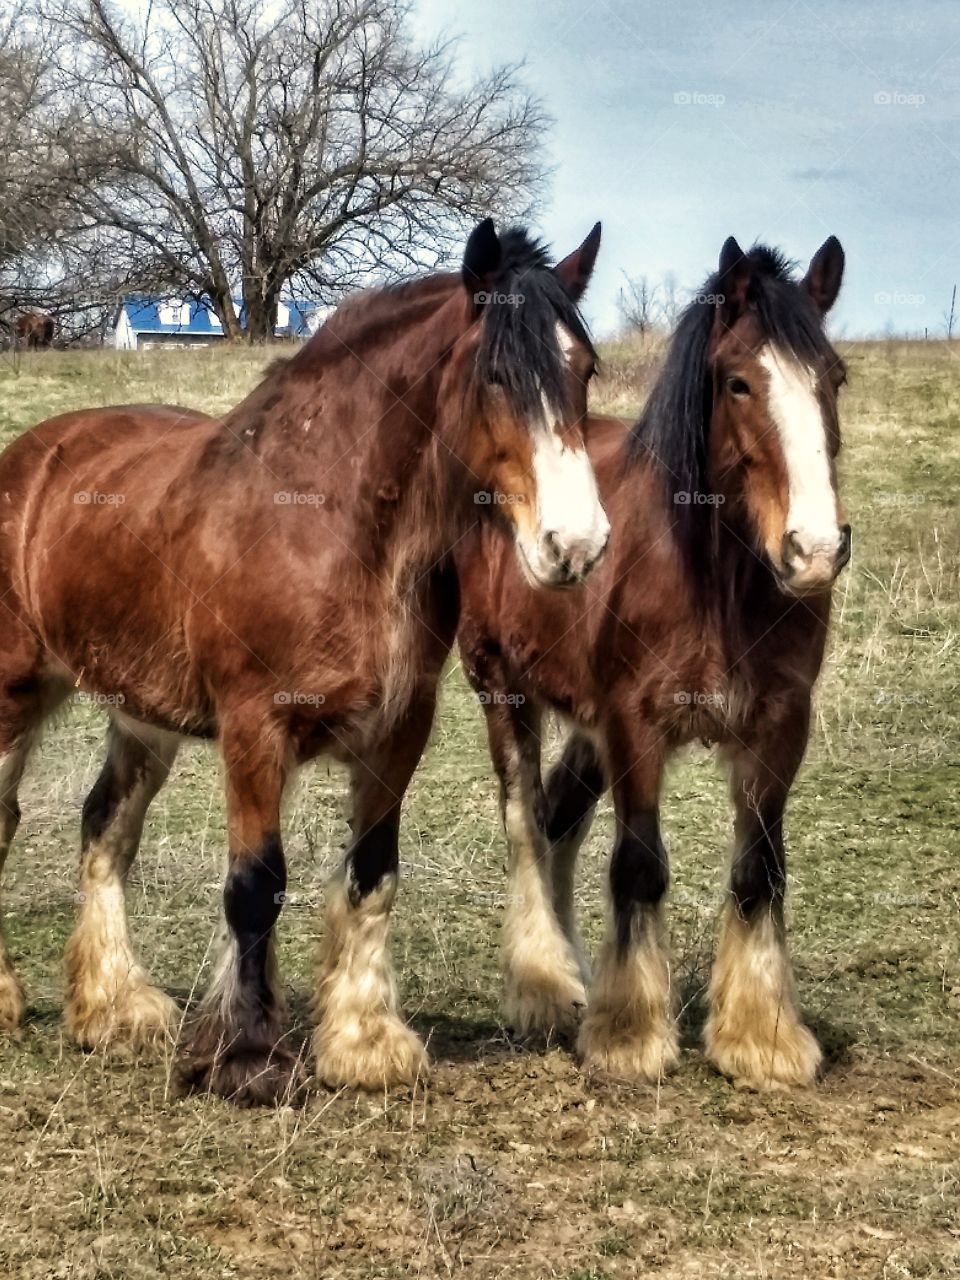 Clydesdales, friends.